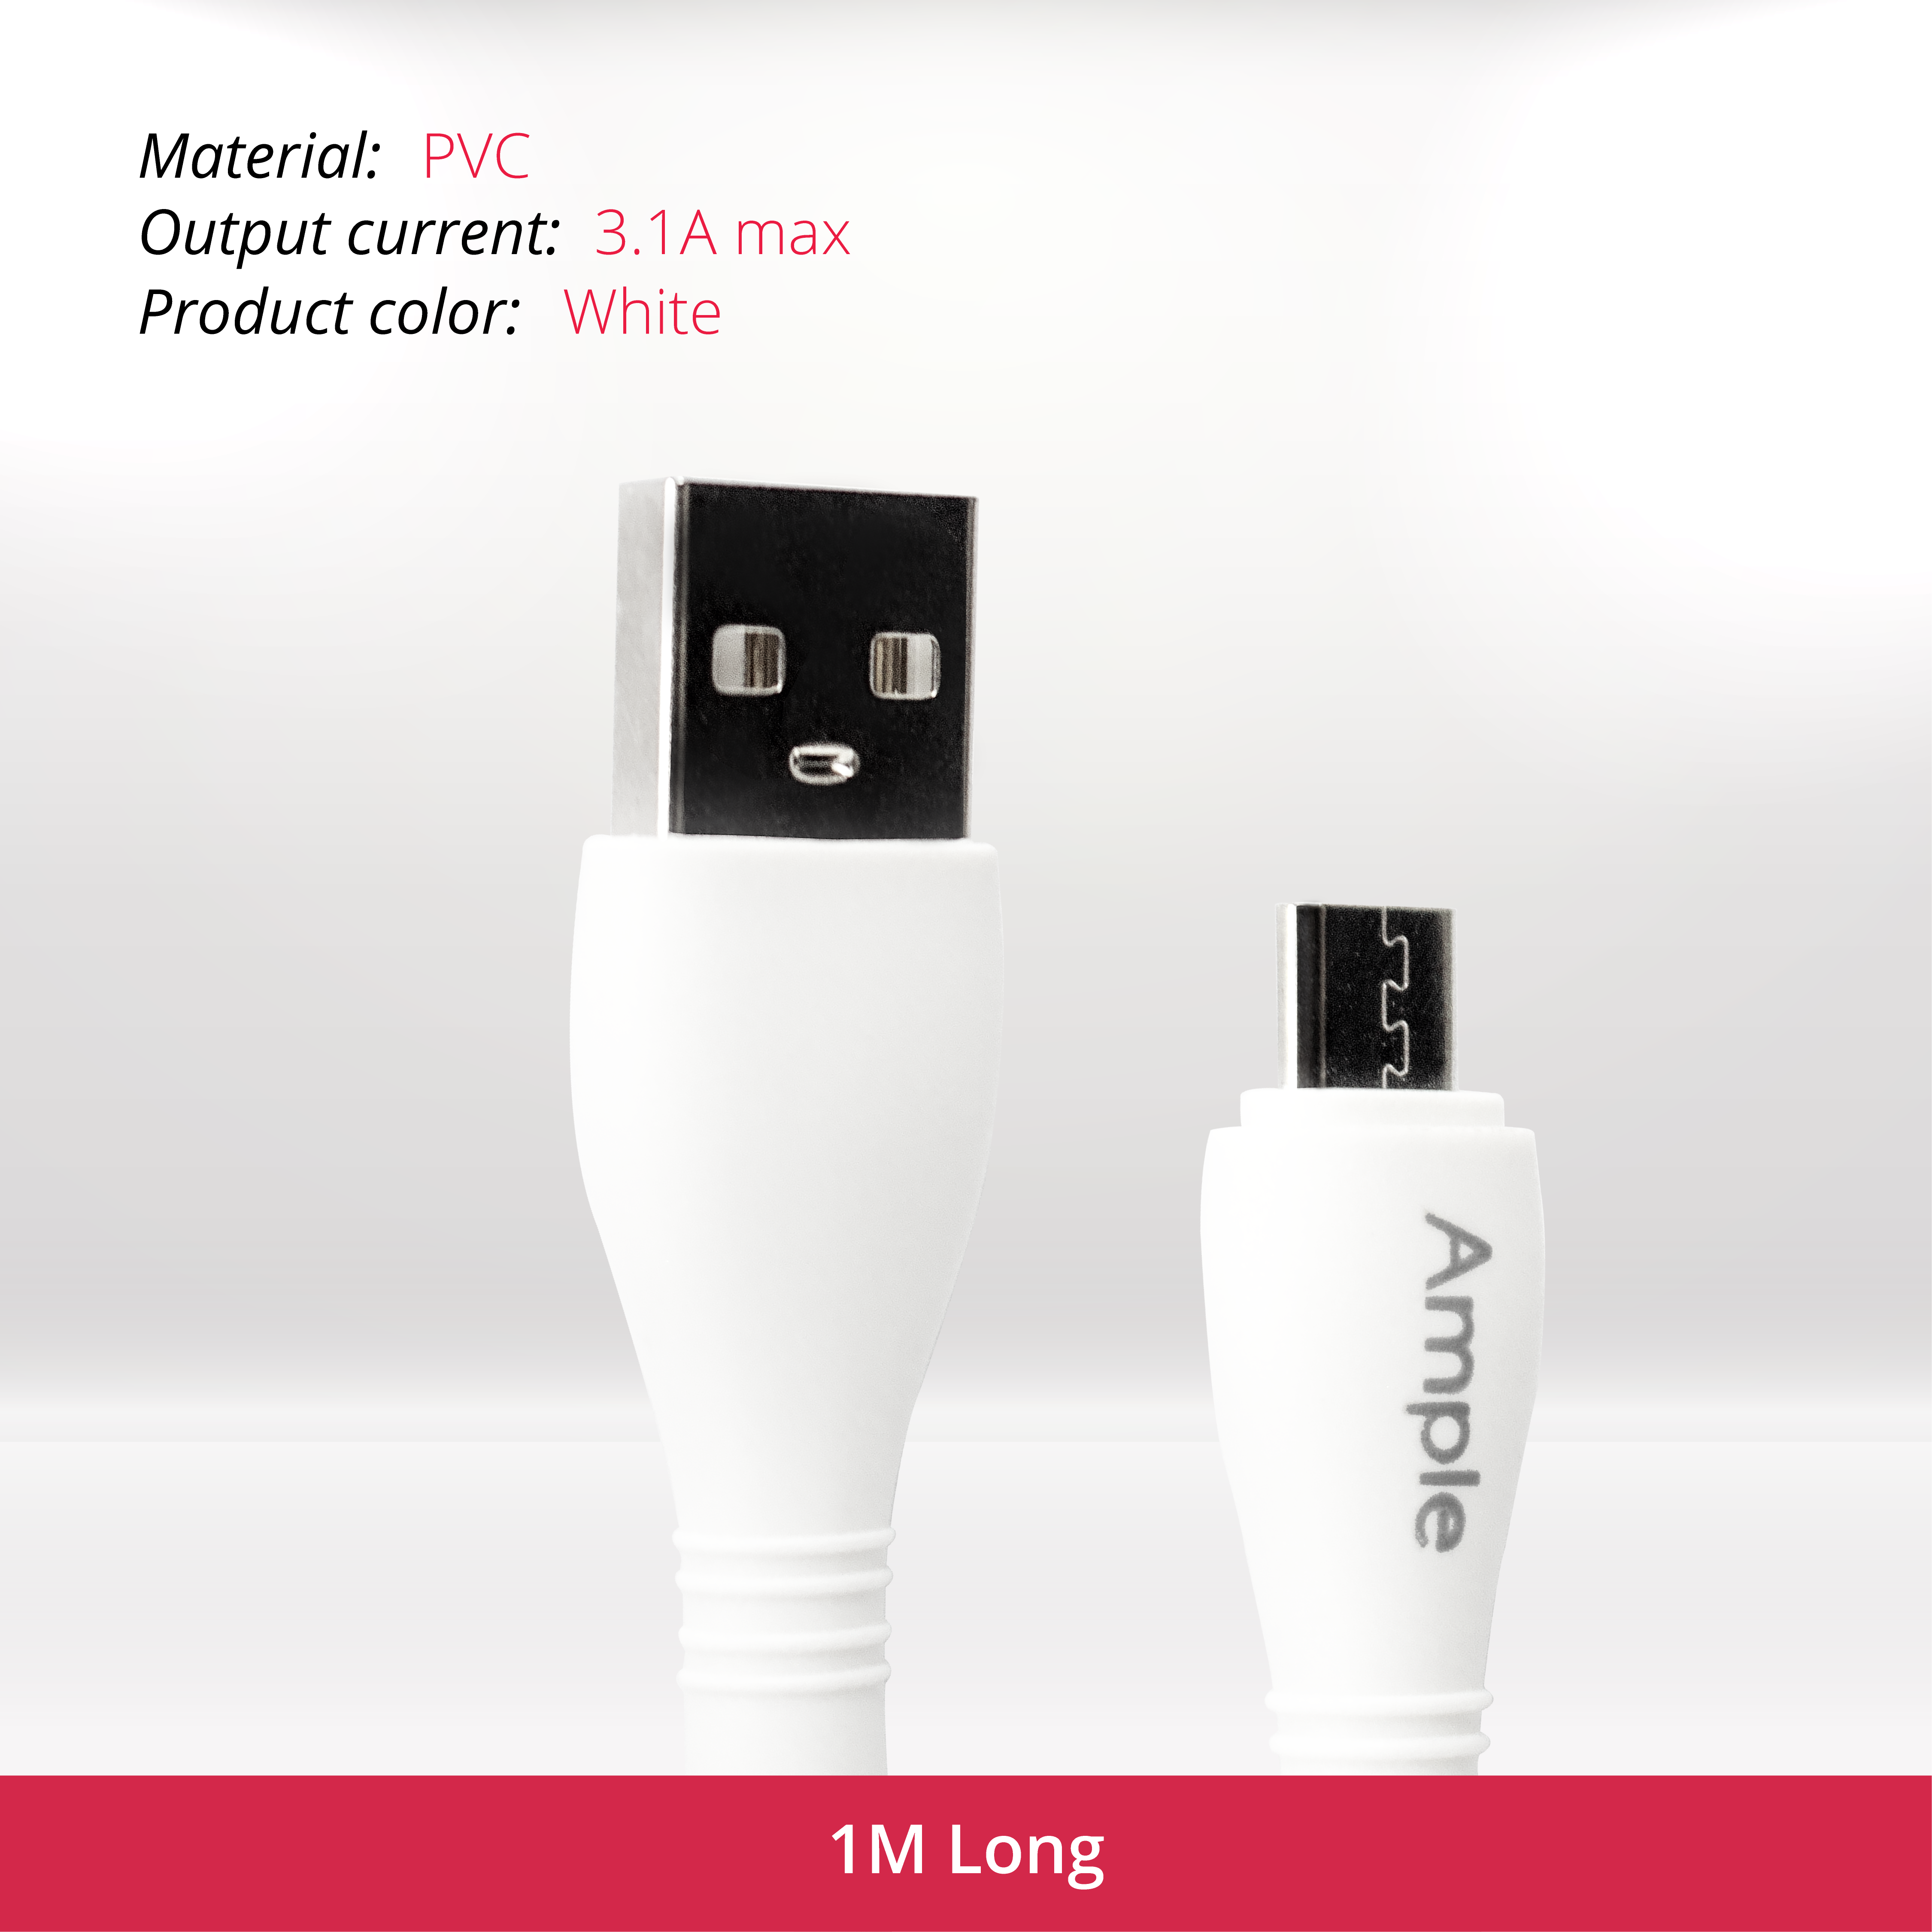 Ample 20W USB Charger + USB-A to Mirco